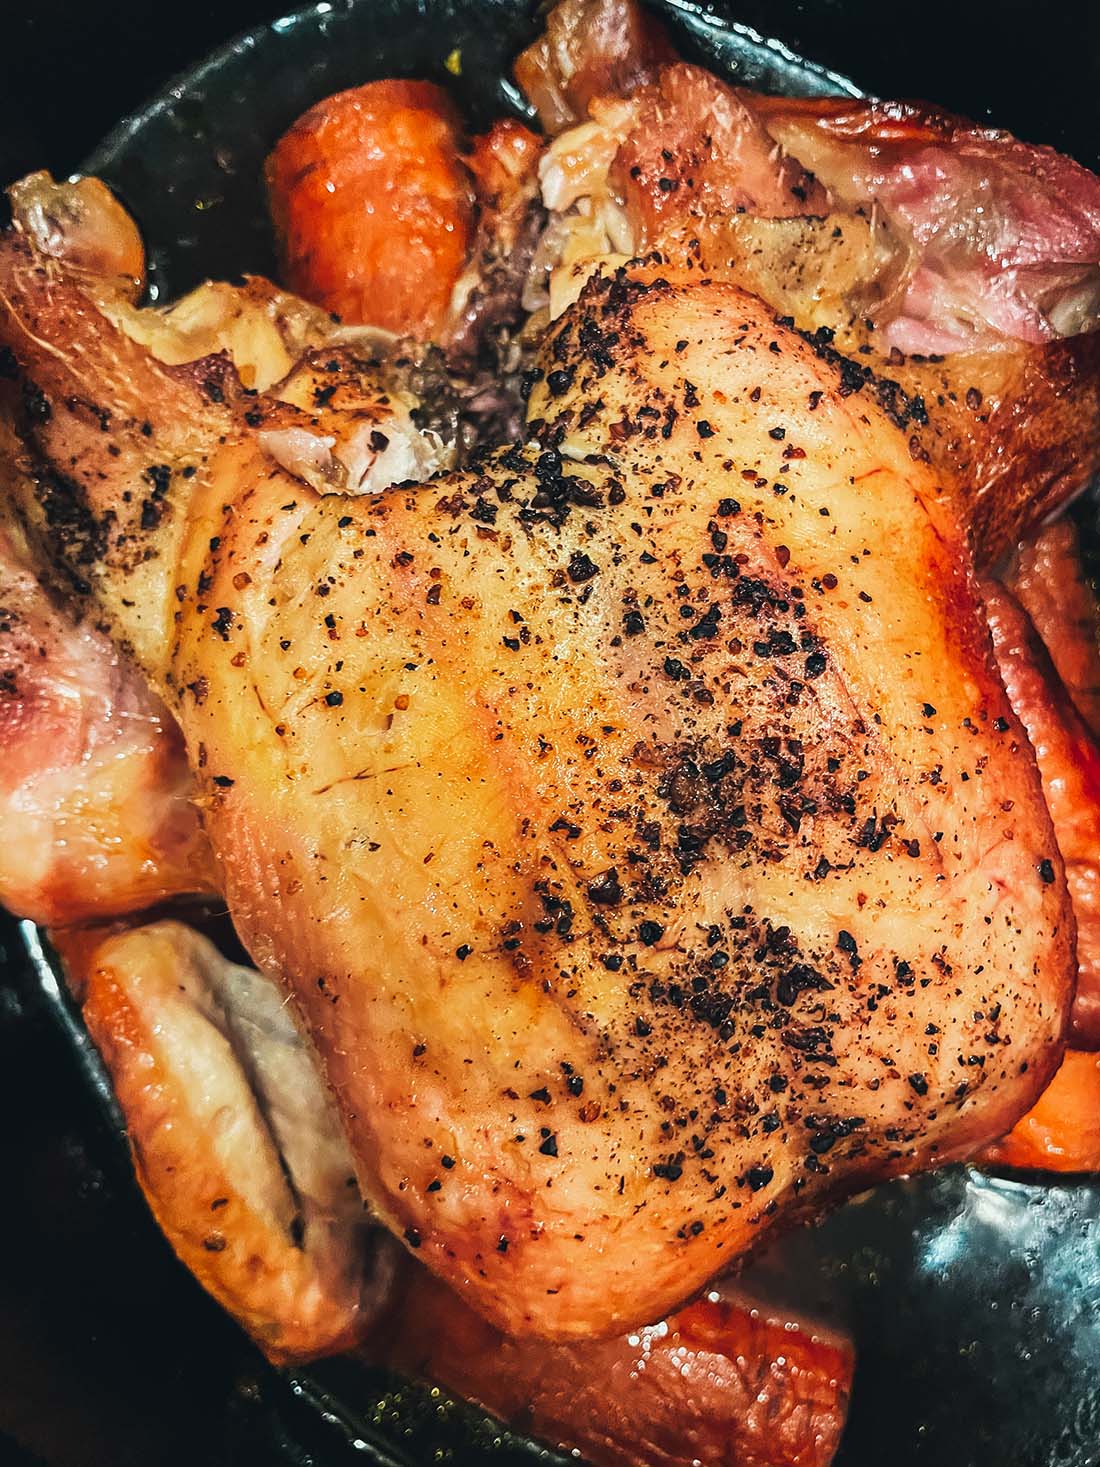 Cook the slow cooker roast chicken for 8 hours